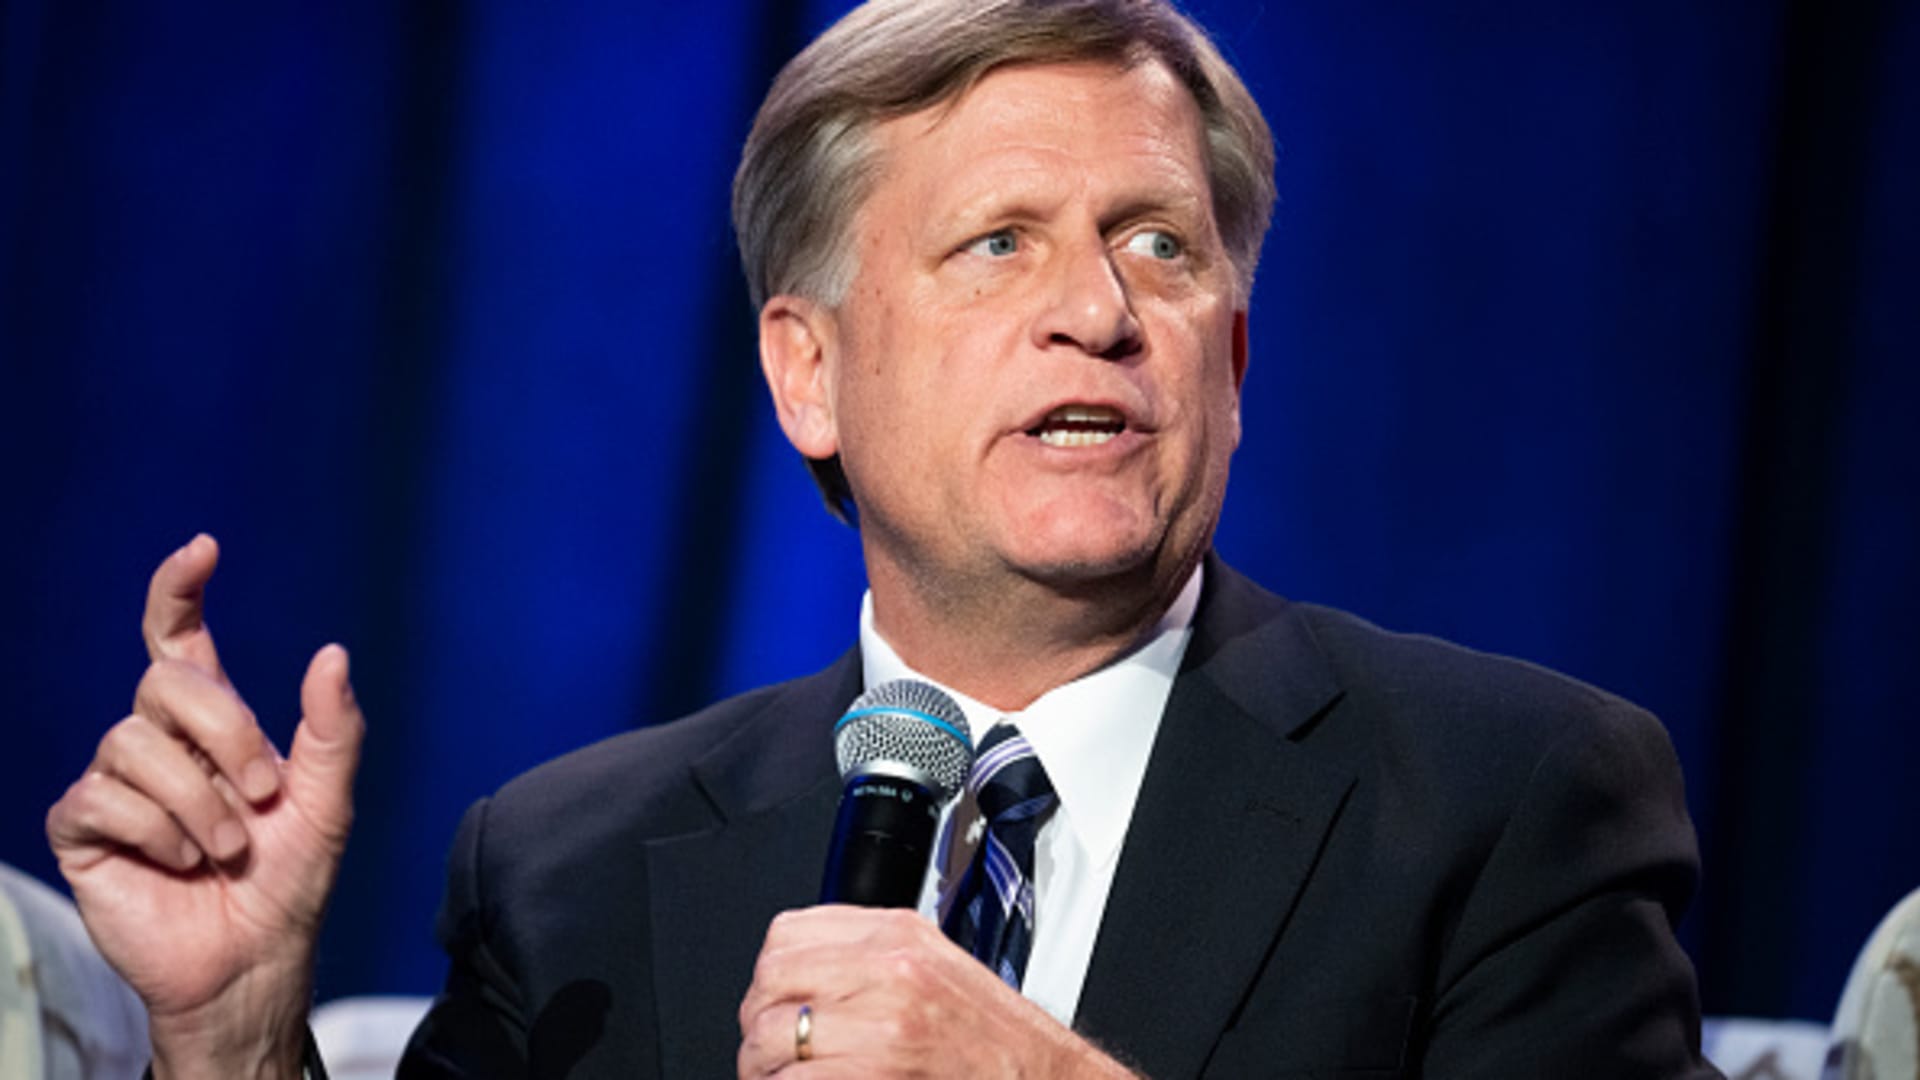 Michael McFaul, former U.S. ambassador to Russia, participate in a discussion with Alejandro Mayorkas, secretary of the Department of Homeland Security, which included the Russian invasion of Ukraine, at the House Democratic Caucus Issues Conference in Philadelphia, Pa., on Thursday, March 10, 2022.